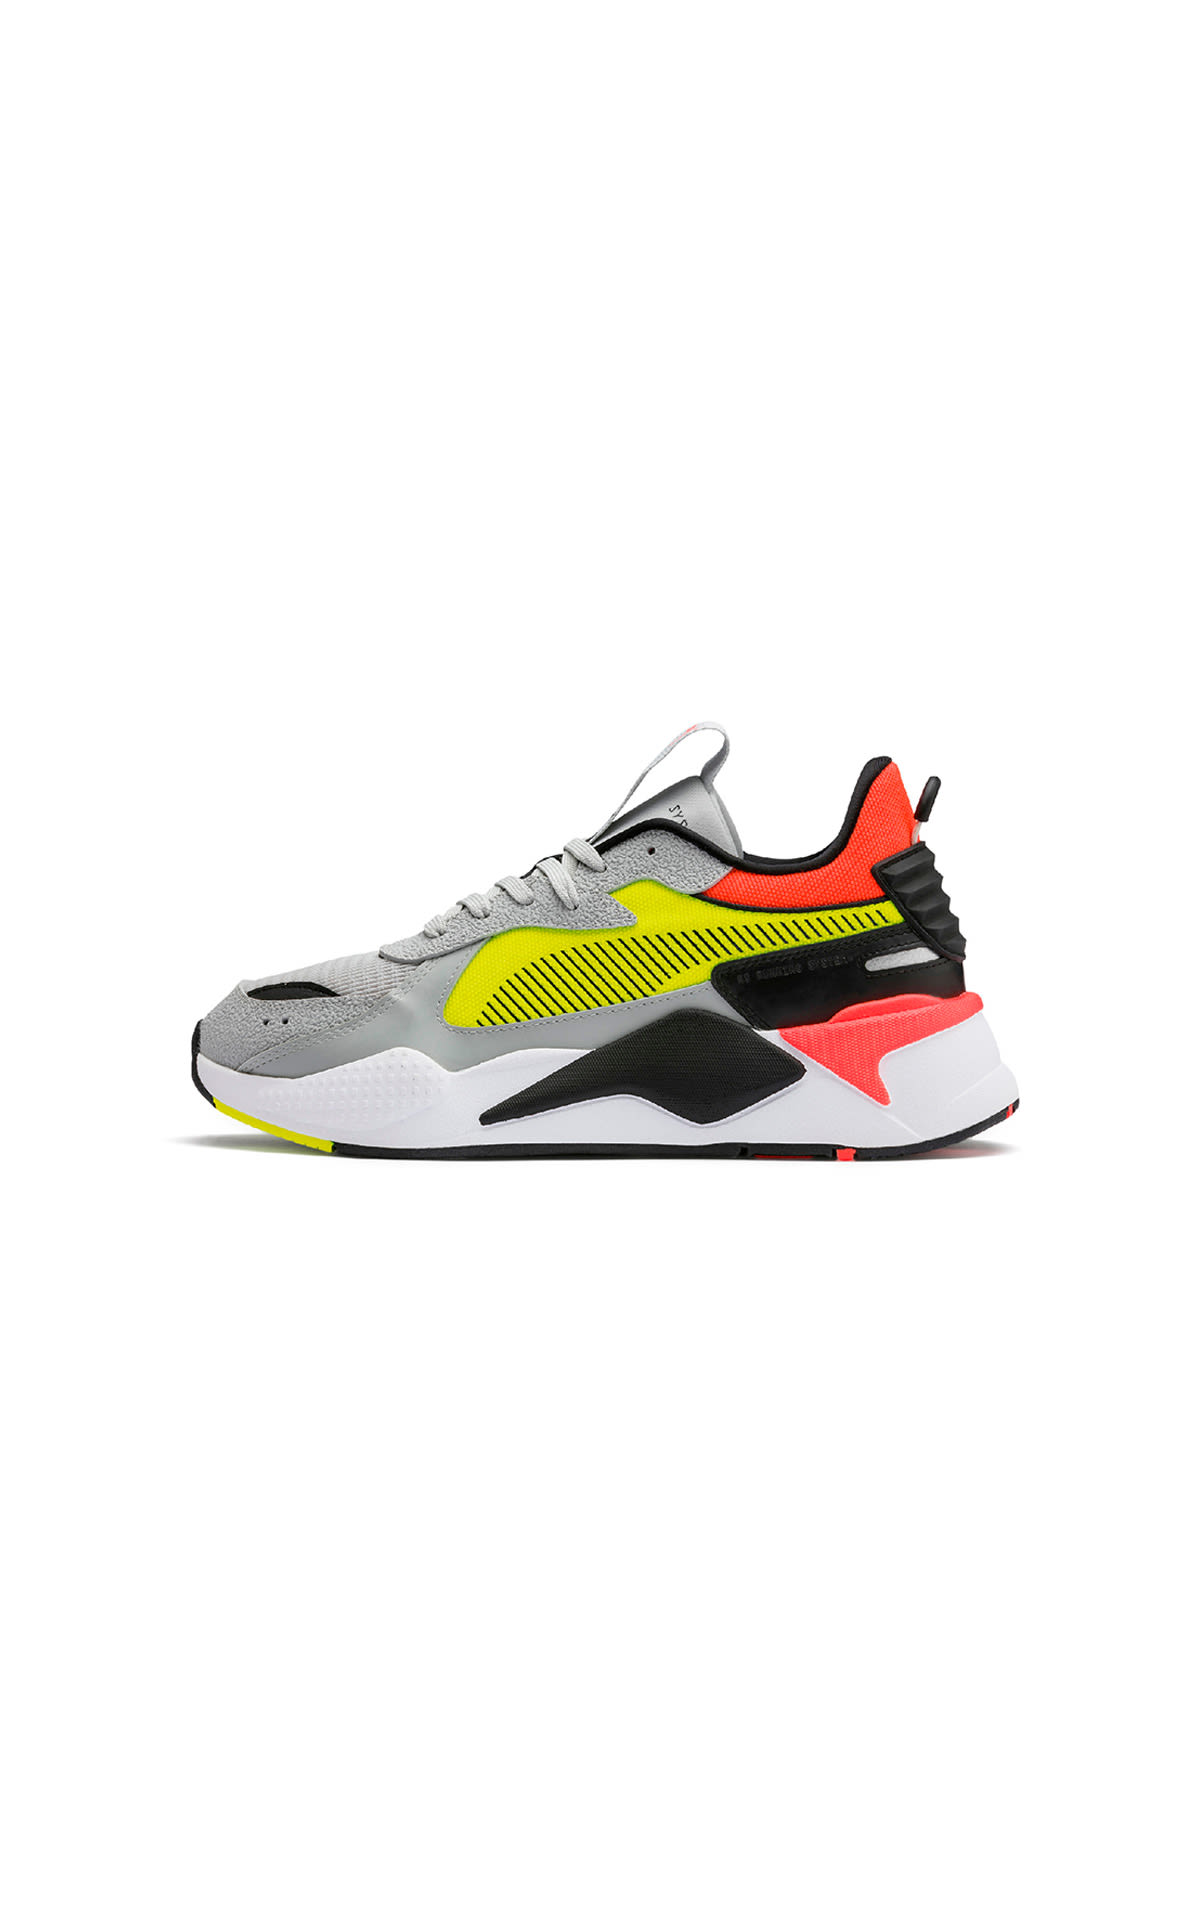 PUMA RS-X hard drive high rise in yellow fusion at The Bicester Village Shopping Collection